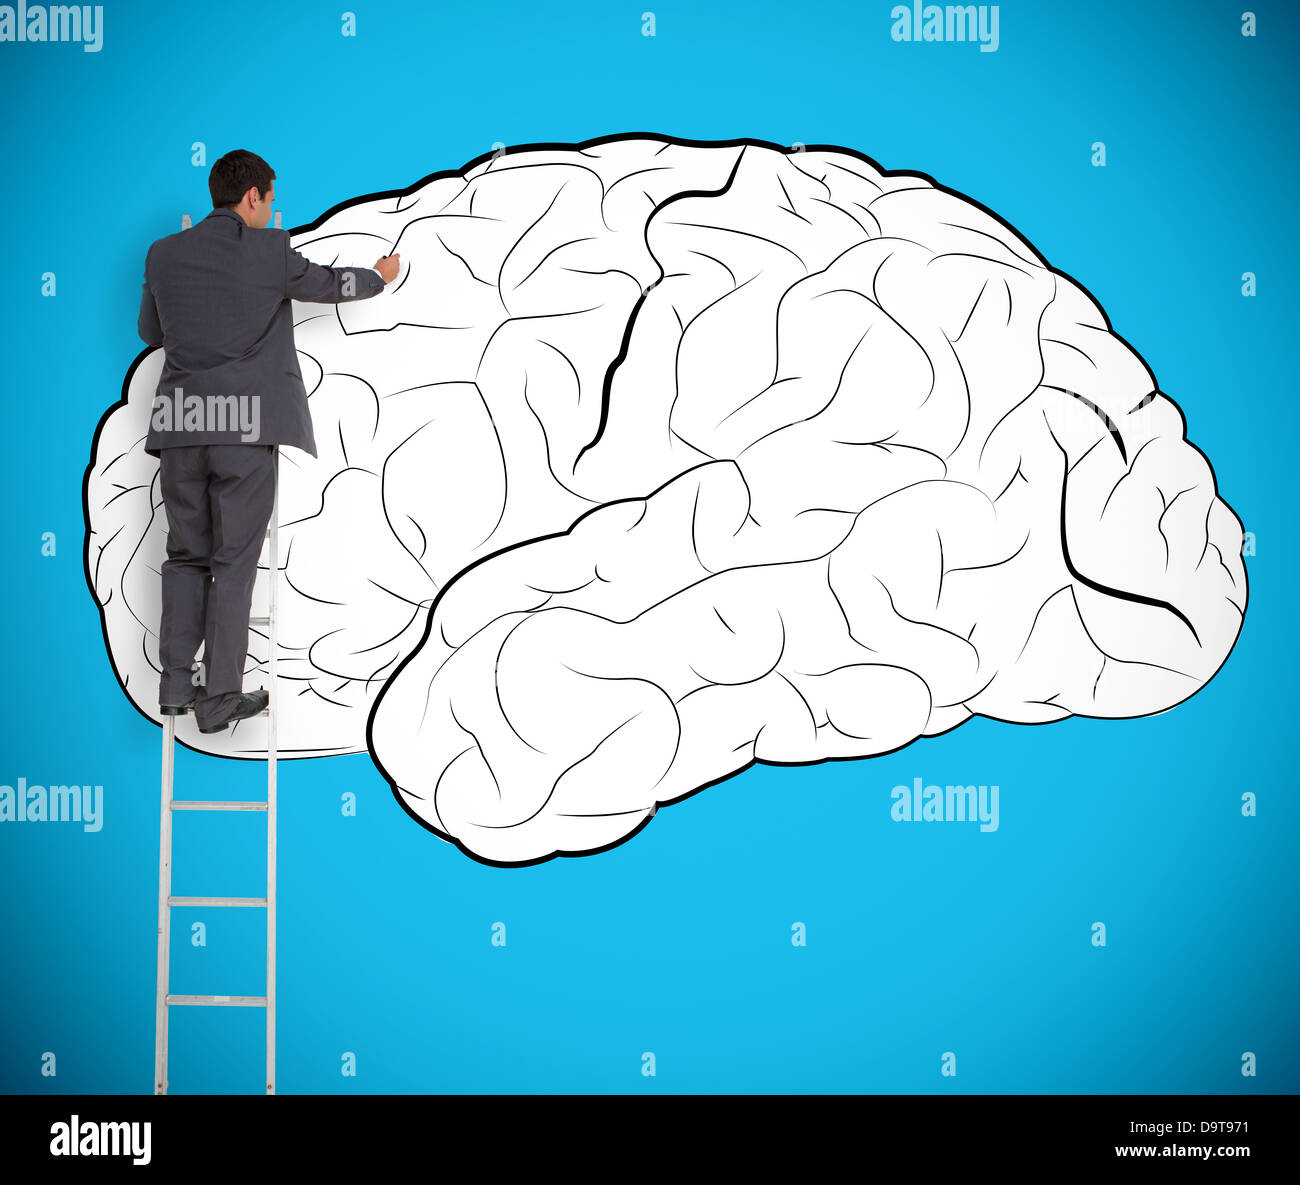 Businessman drawing a brain on a giant wall Stock Photo